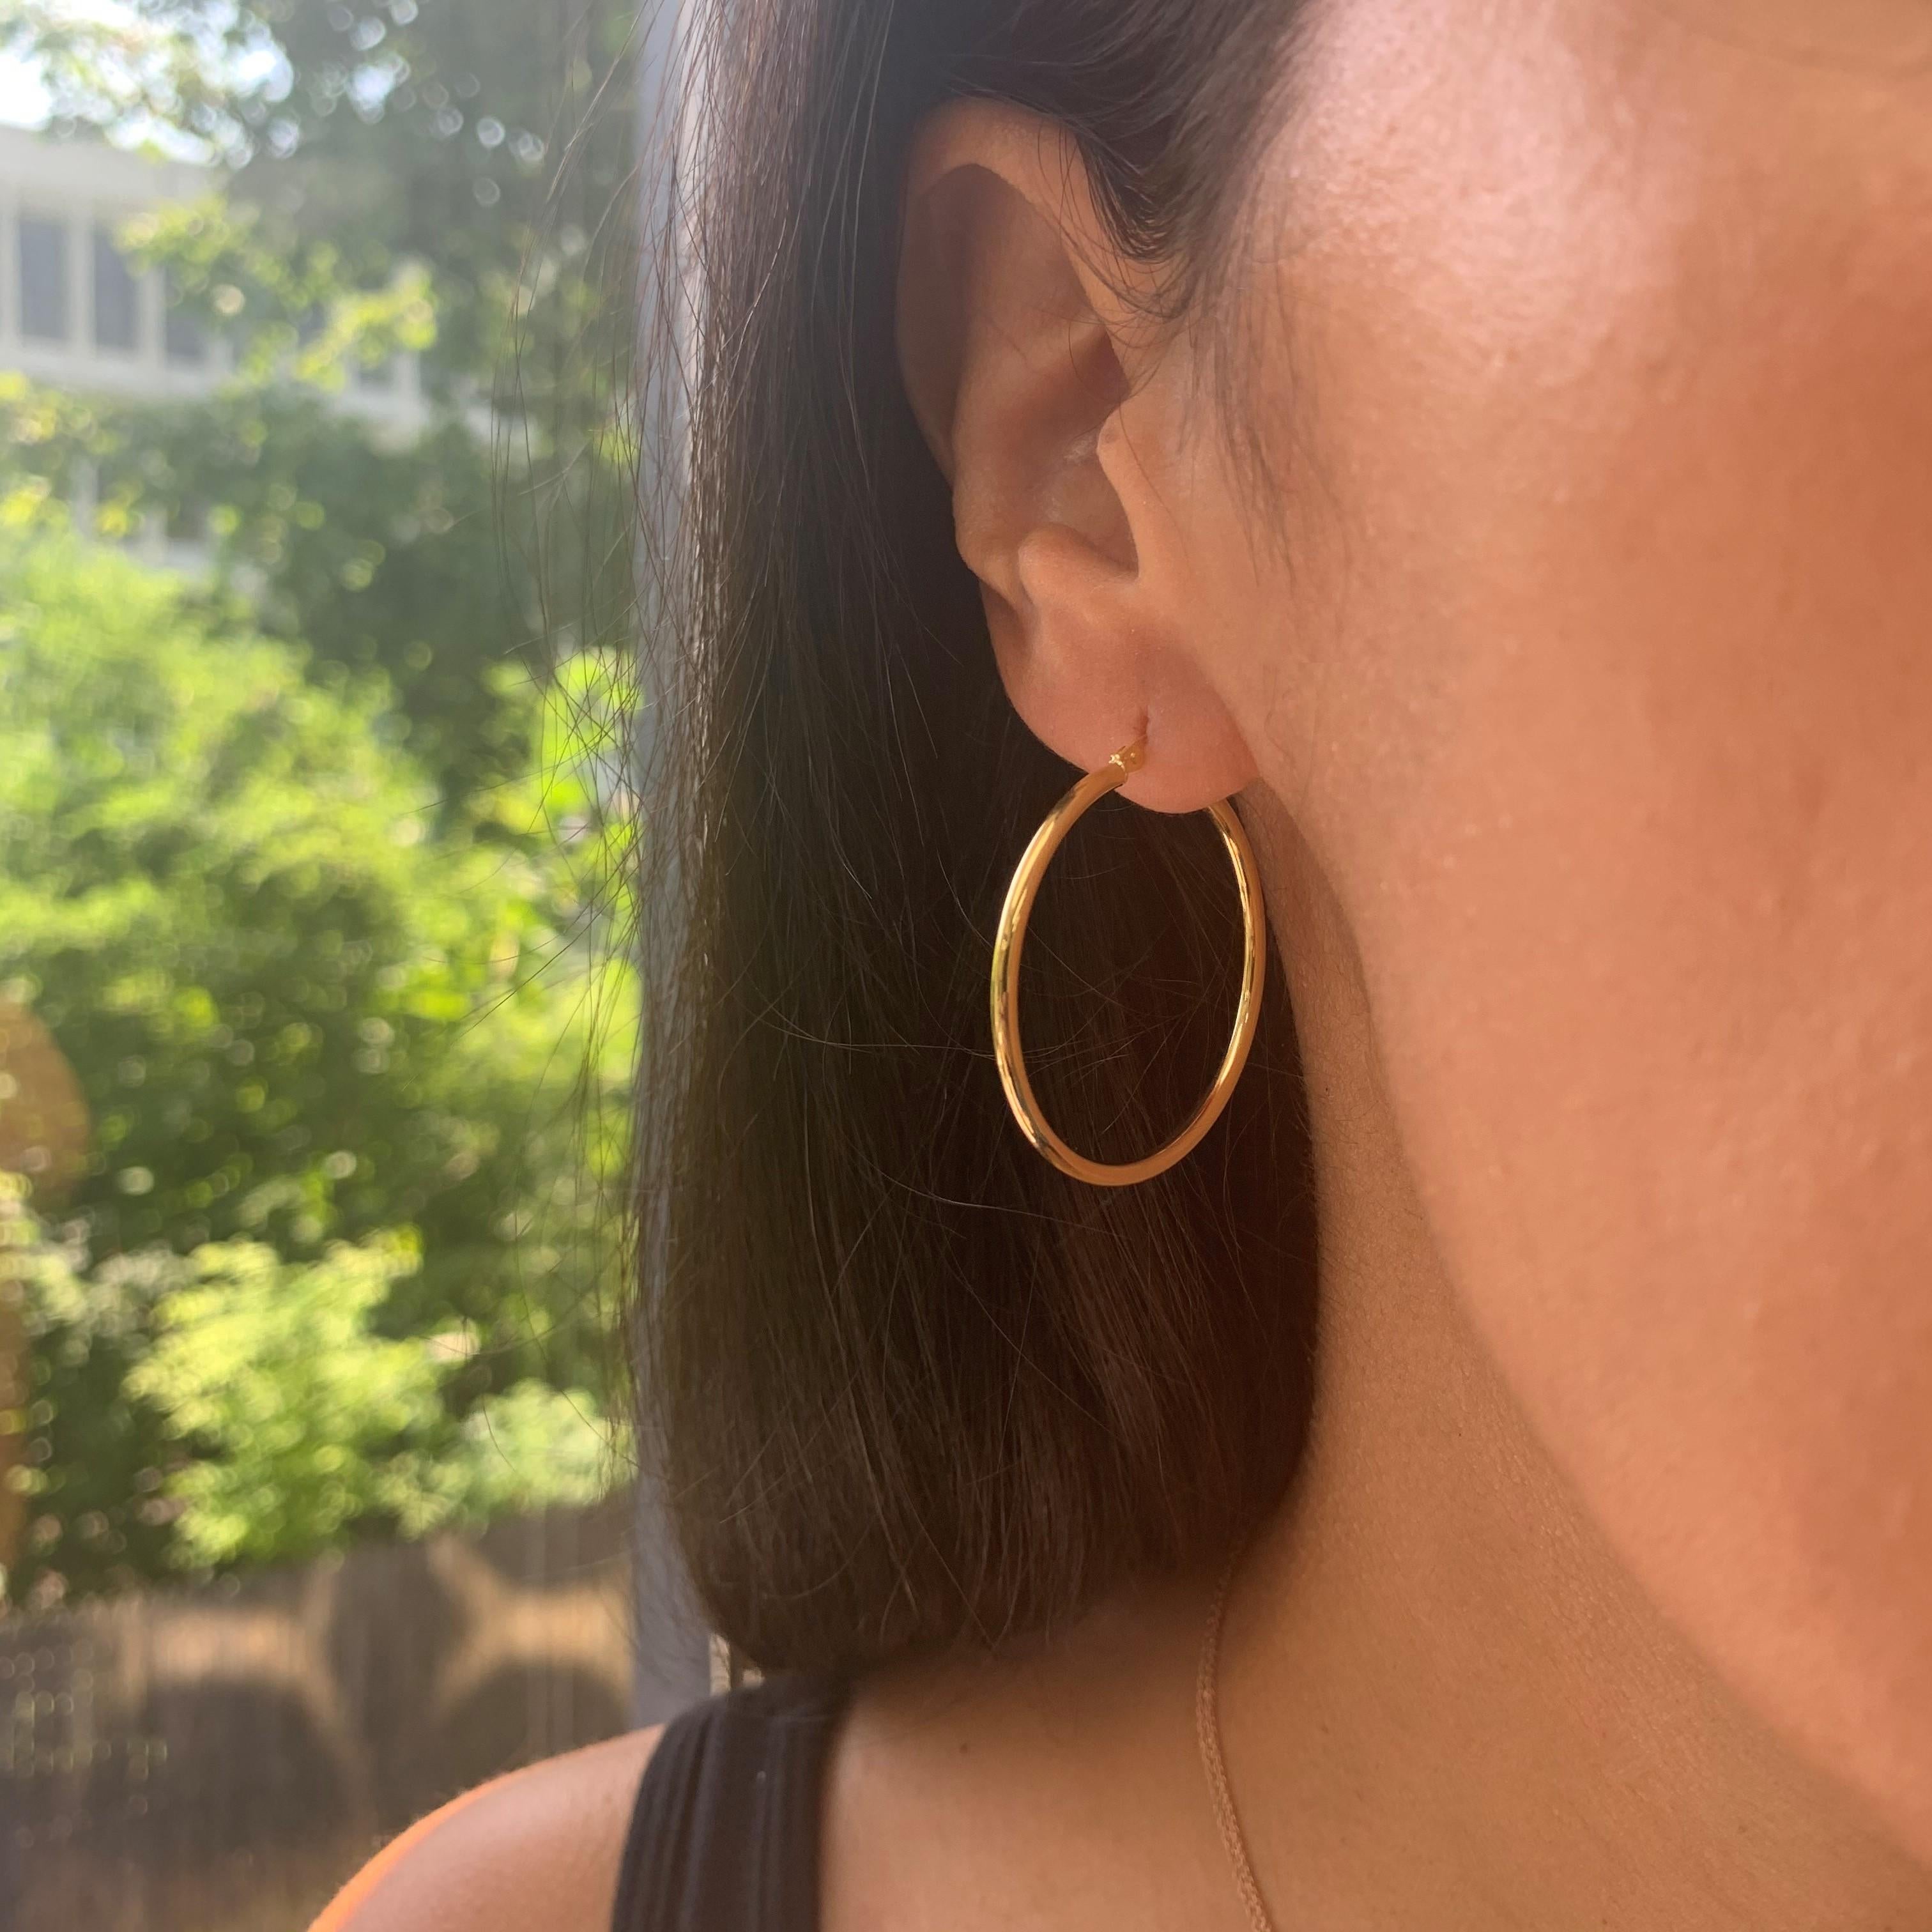 These Elegant and Stylish 14K Yellow Gold Hoop Earrings will add that perfect Glam to your look! Earring Measurements are 2 X 30 MM. 
Made in Italy. 
1.25